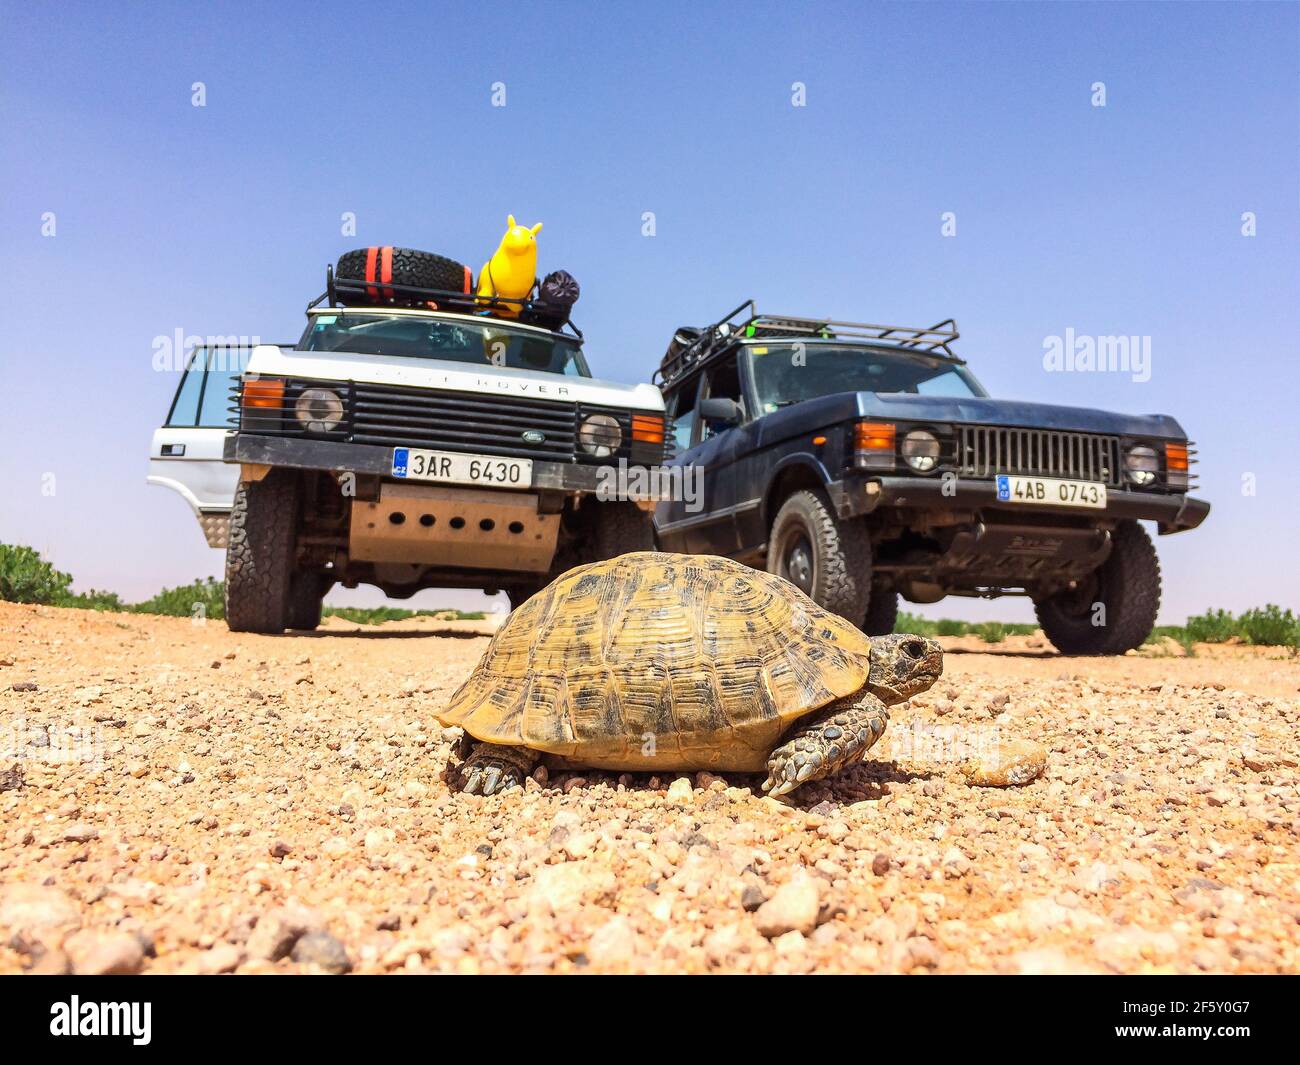 Zaida, Morocco - April 10, 2015. Greek tortoise walking through the dirt road stopped two vintage off road cars on road trip Stock Photo